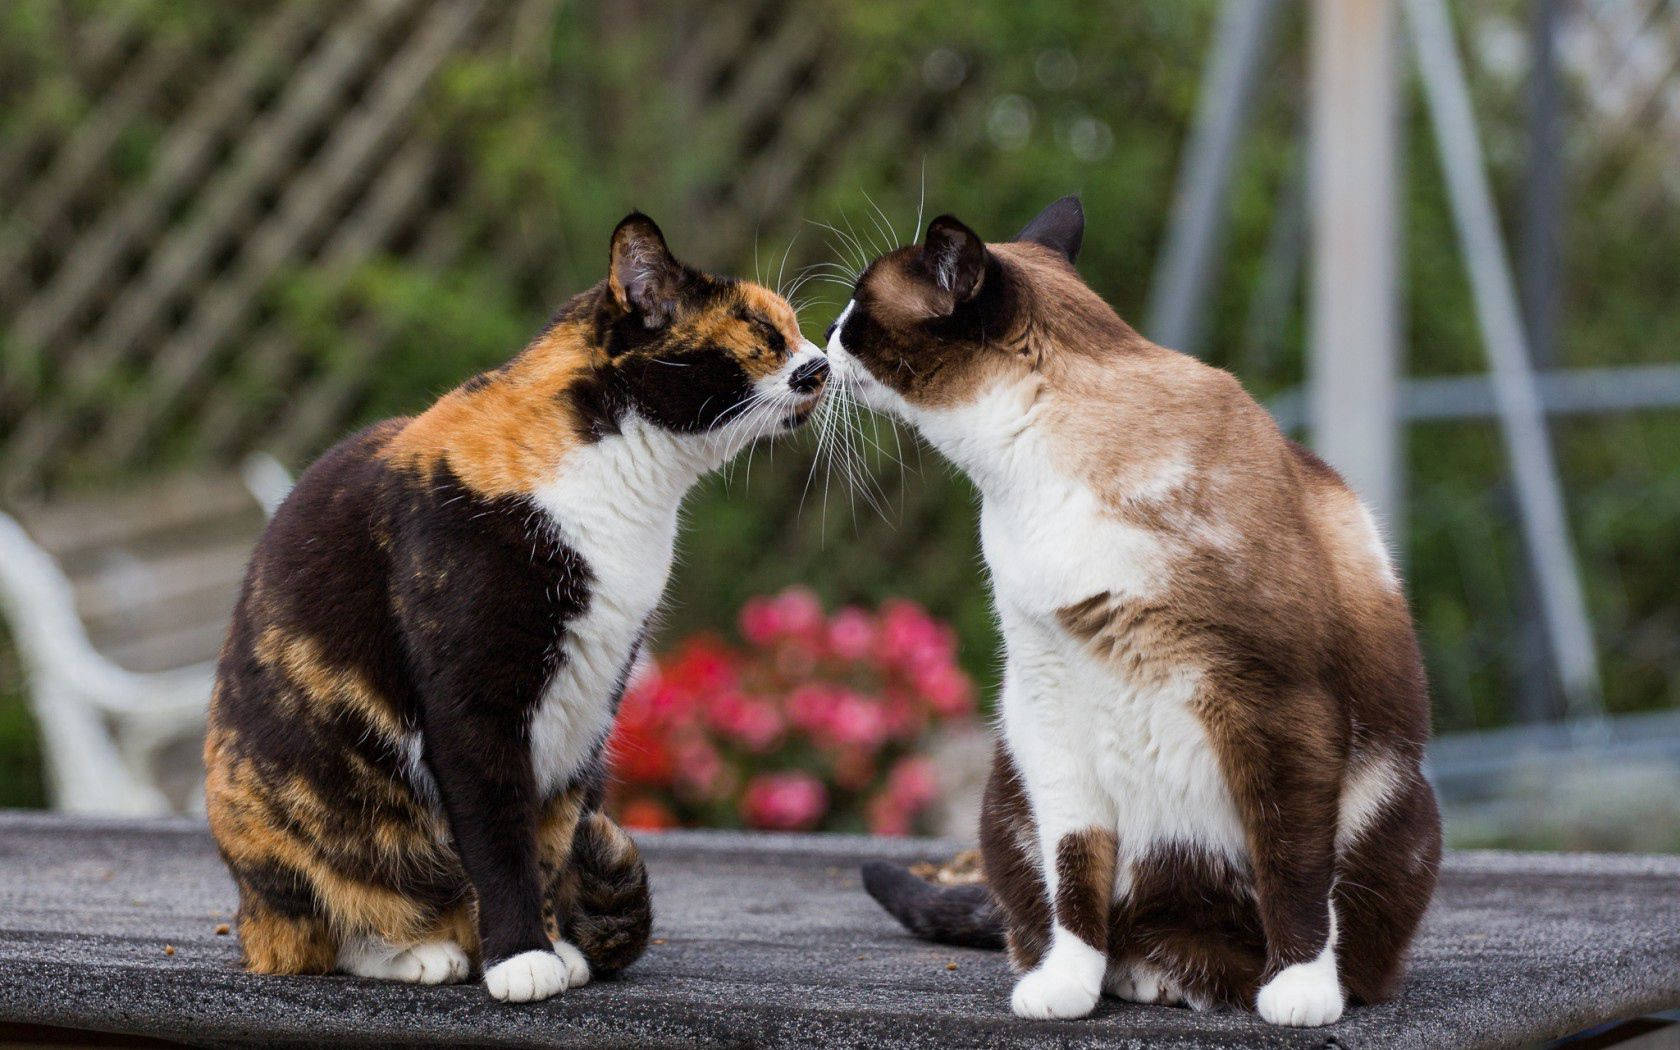 Friendship Doesn't Come In Shapes & Sizes, It Comes With Lots Of Love & Purrs 🐱 💞